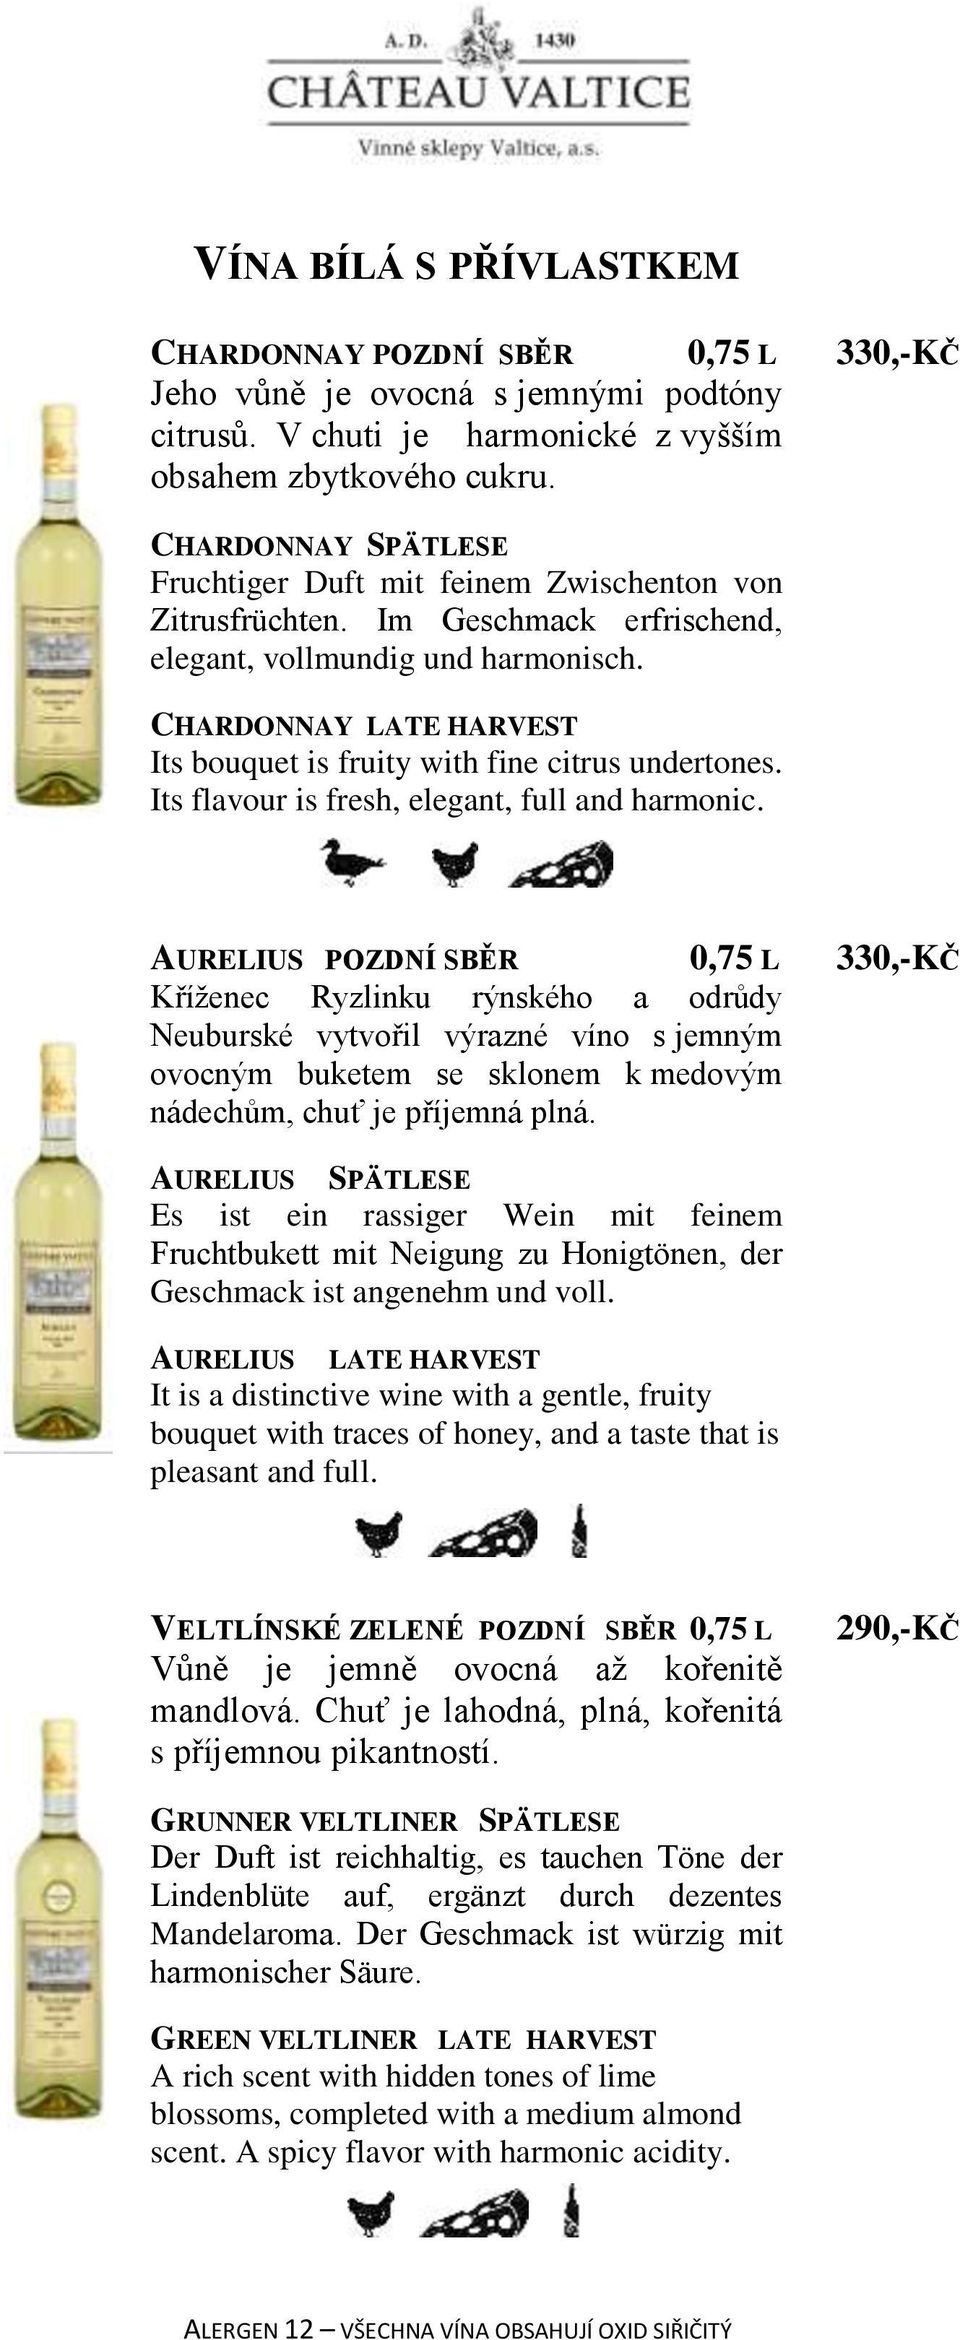 CHARDONNAY LATE HARVEST Its bouquet is fruity with fine citrus undertones. Its flavour is fresh, elegant, full and harmonic.